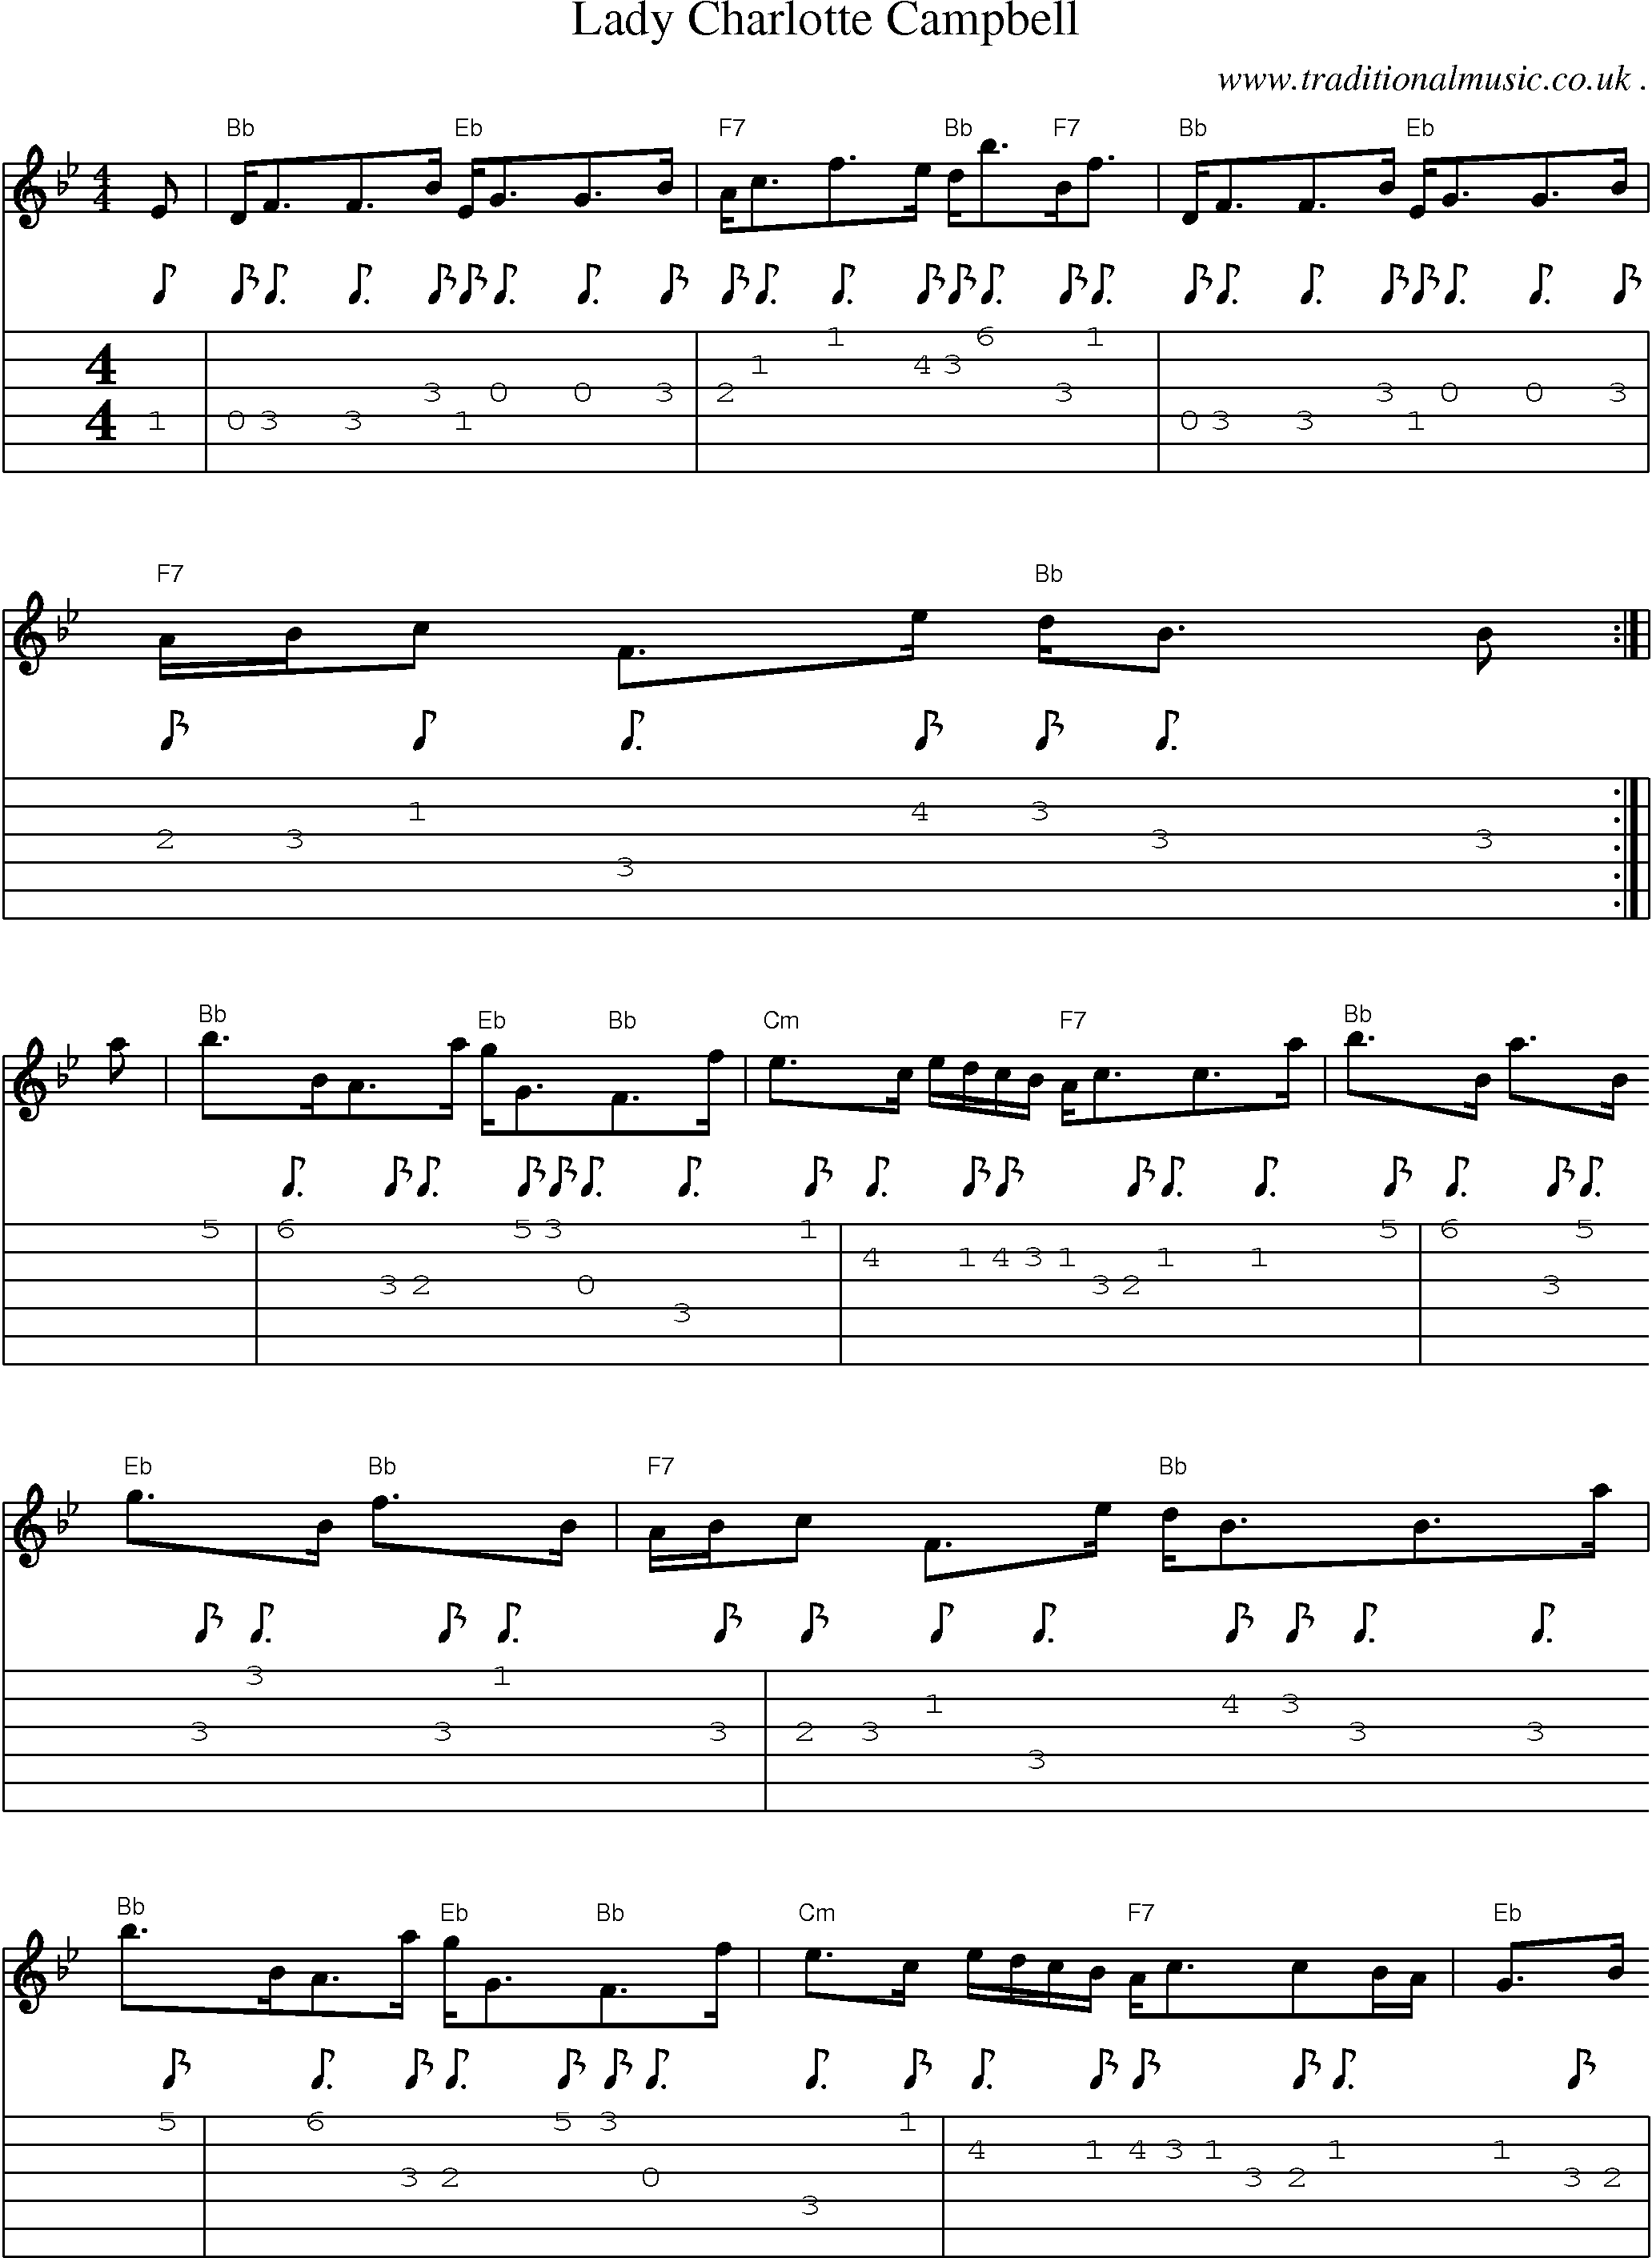 Sheet-music  score, Chords and Guitar Tabs for Lady Charlotte Campbell